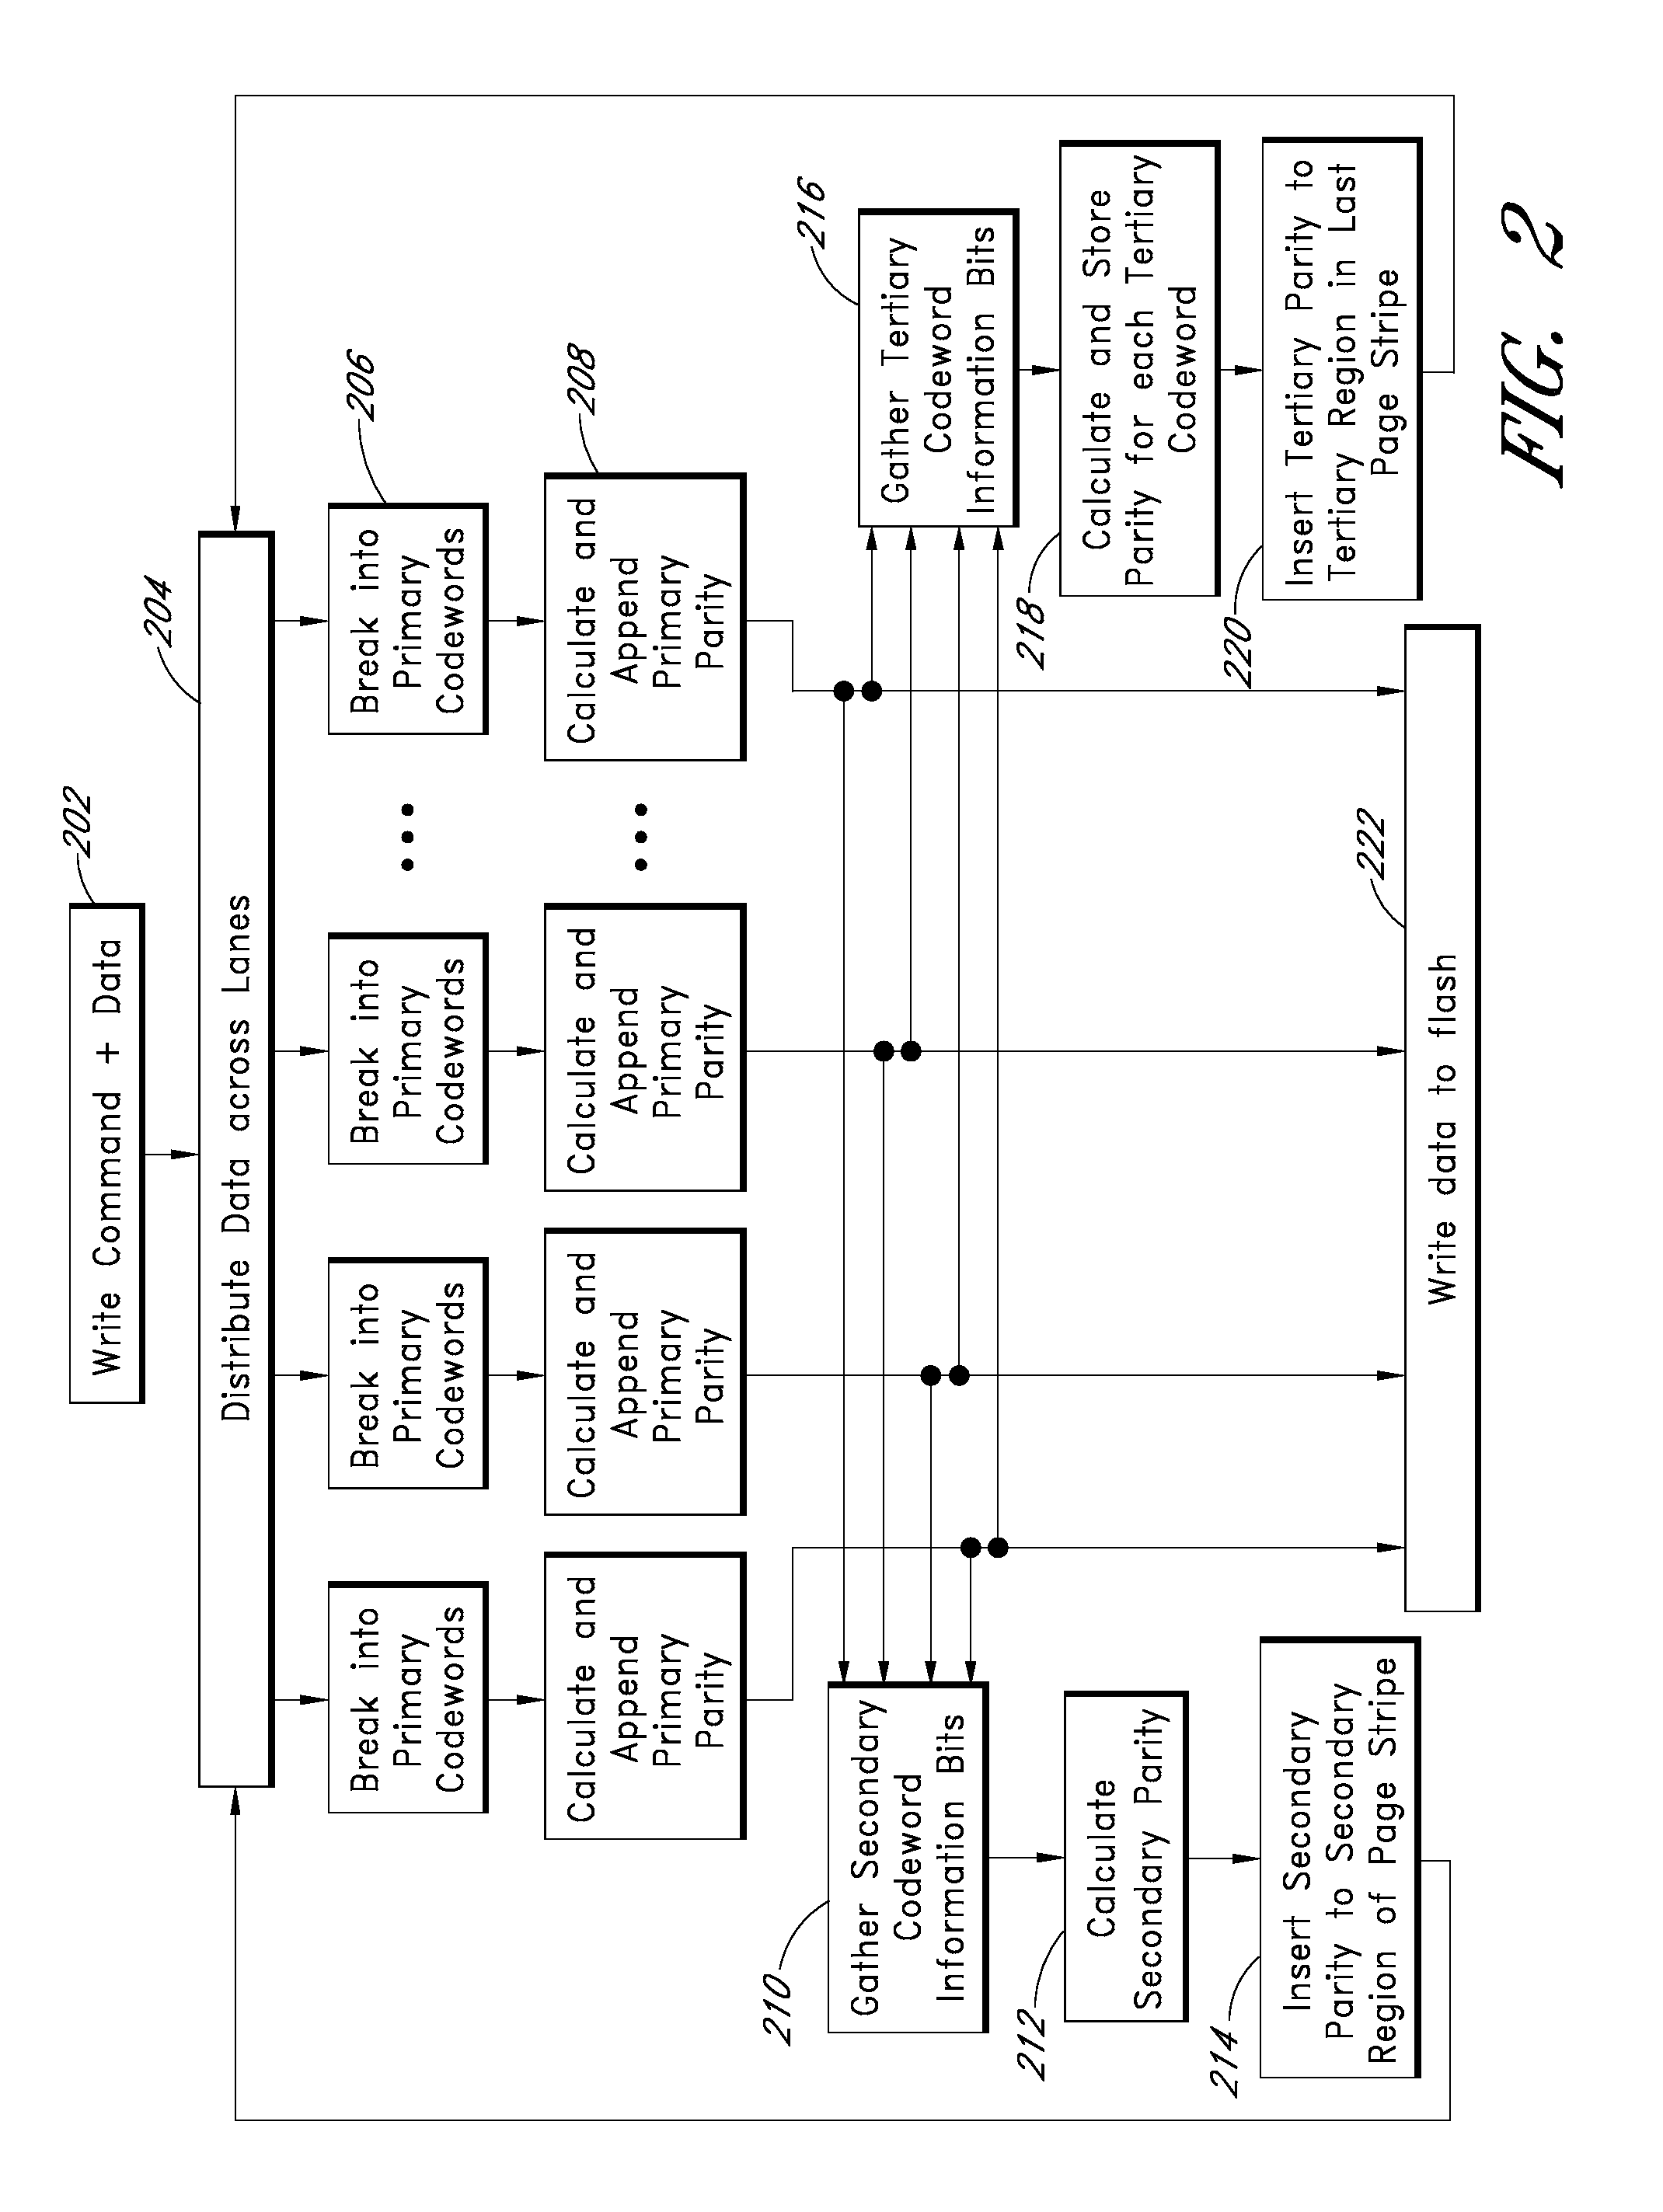 Systems and methods for reclaiming flash blocks of a flash drive